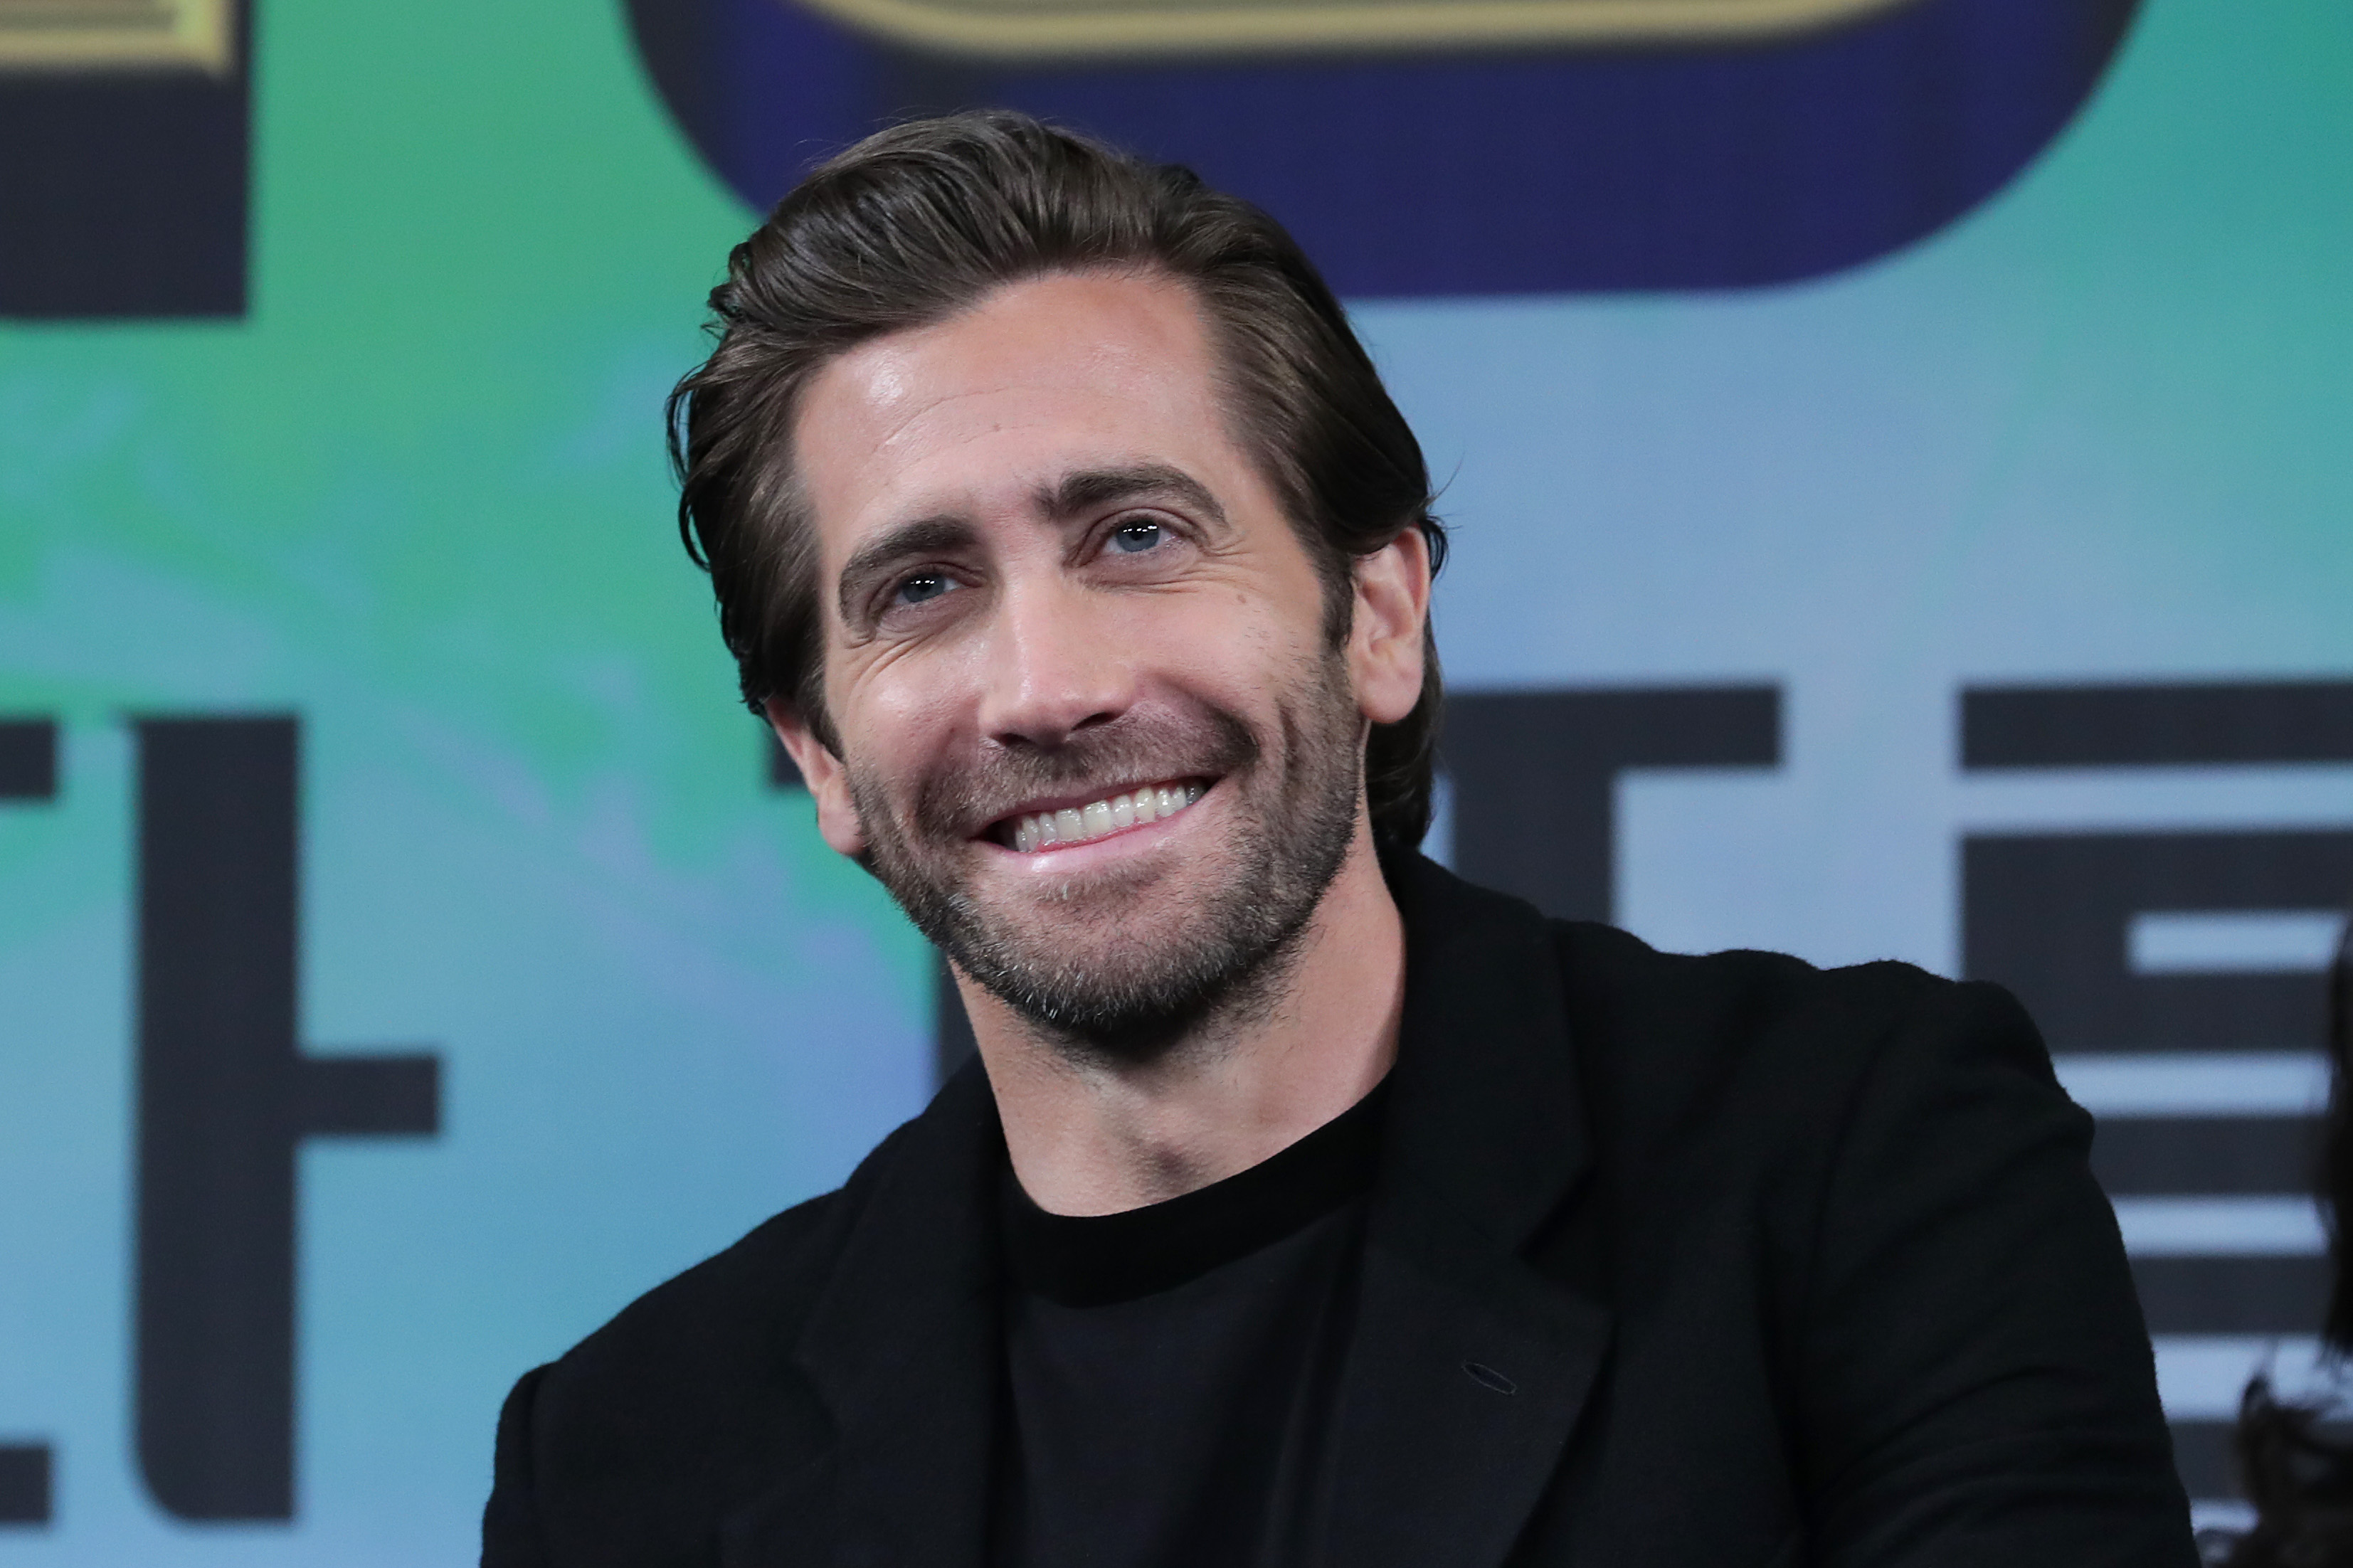 Actor Jake Gyllenhaal, in a black t-shirt and sweater, smiling while at a press conference promoting 'Spier-Man: Far from Home' in Seoul, South Korea in 2019.